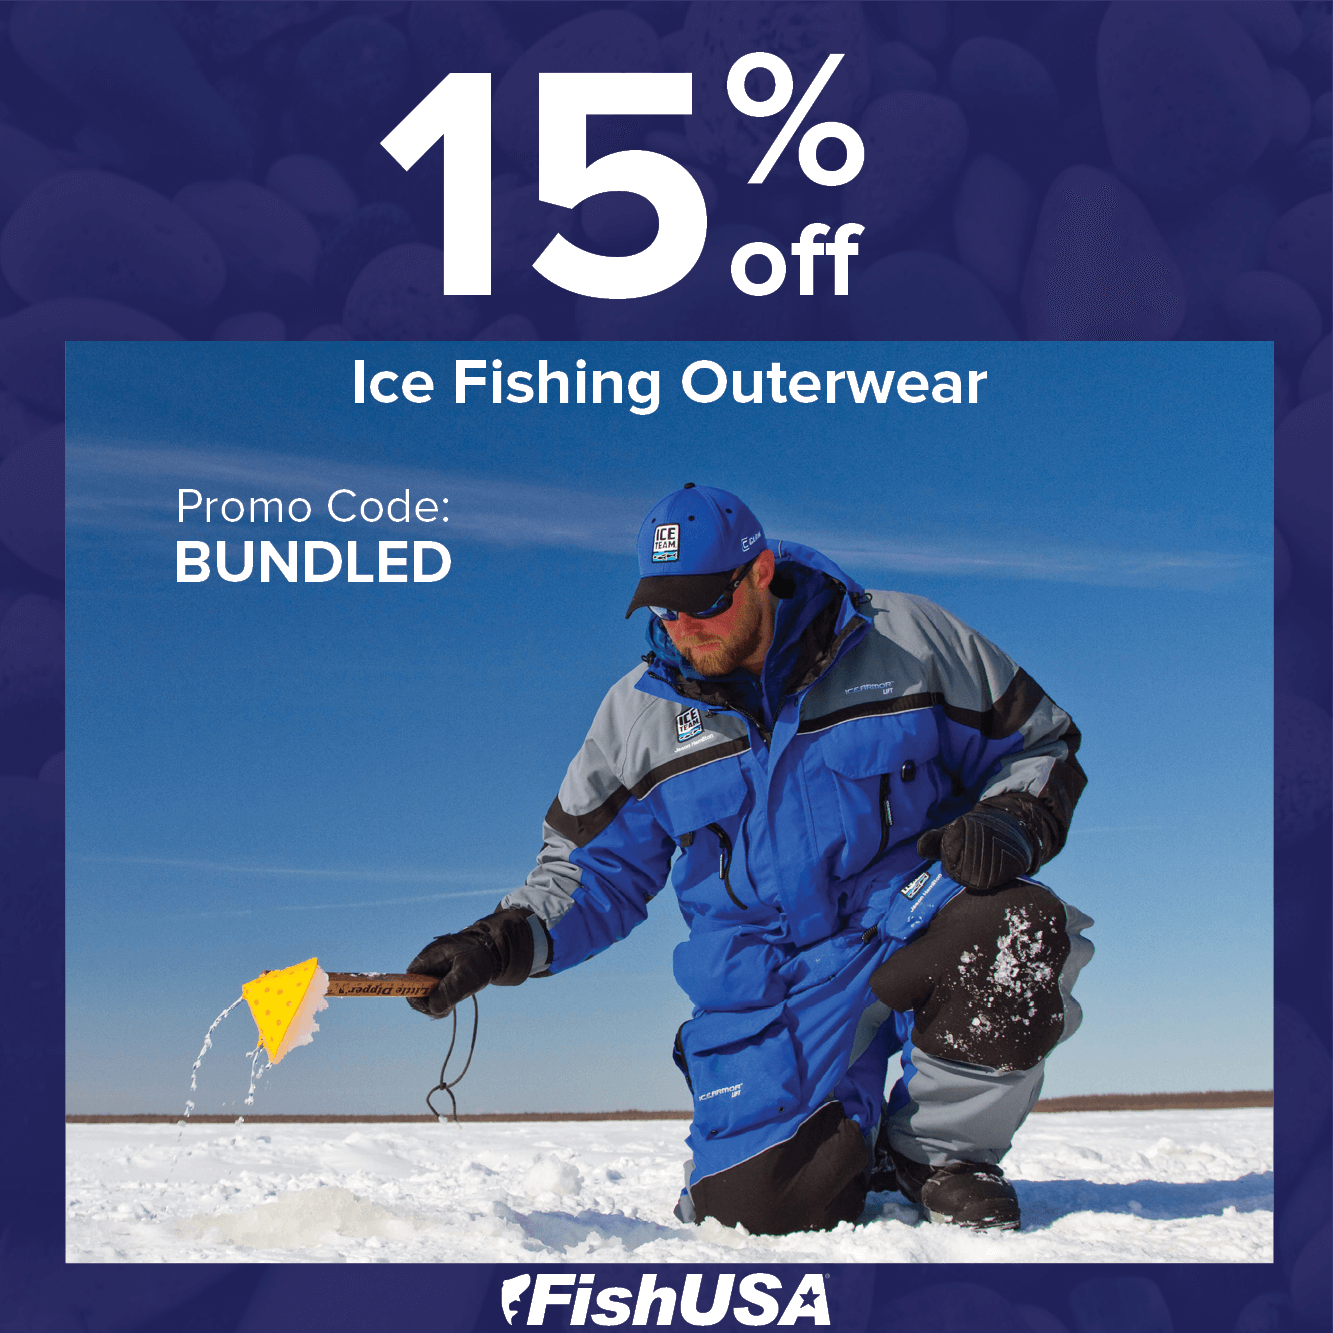 Save 15% on Ice Fishing Outerwear